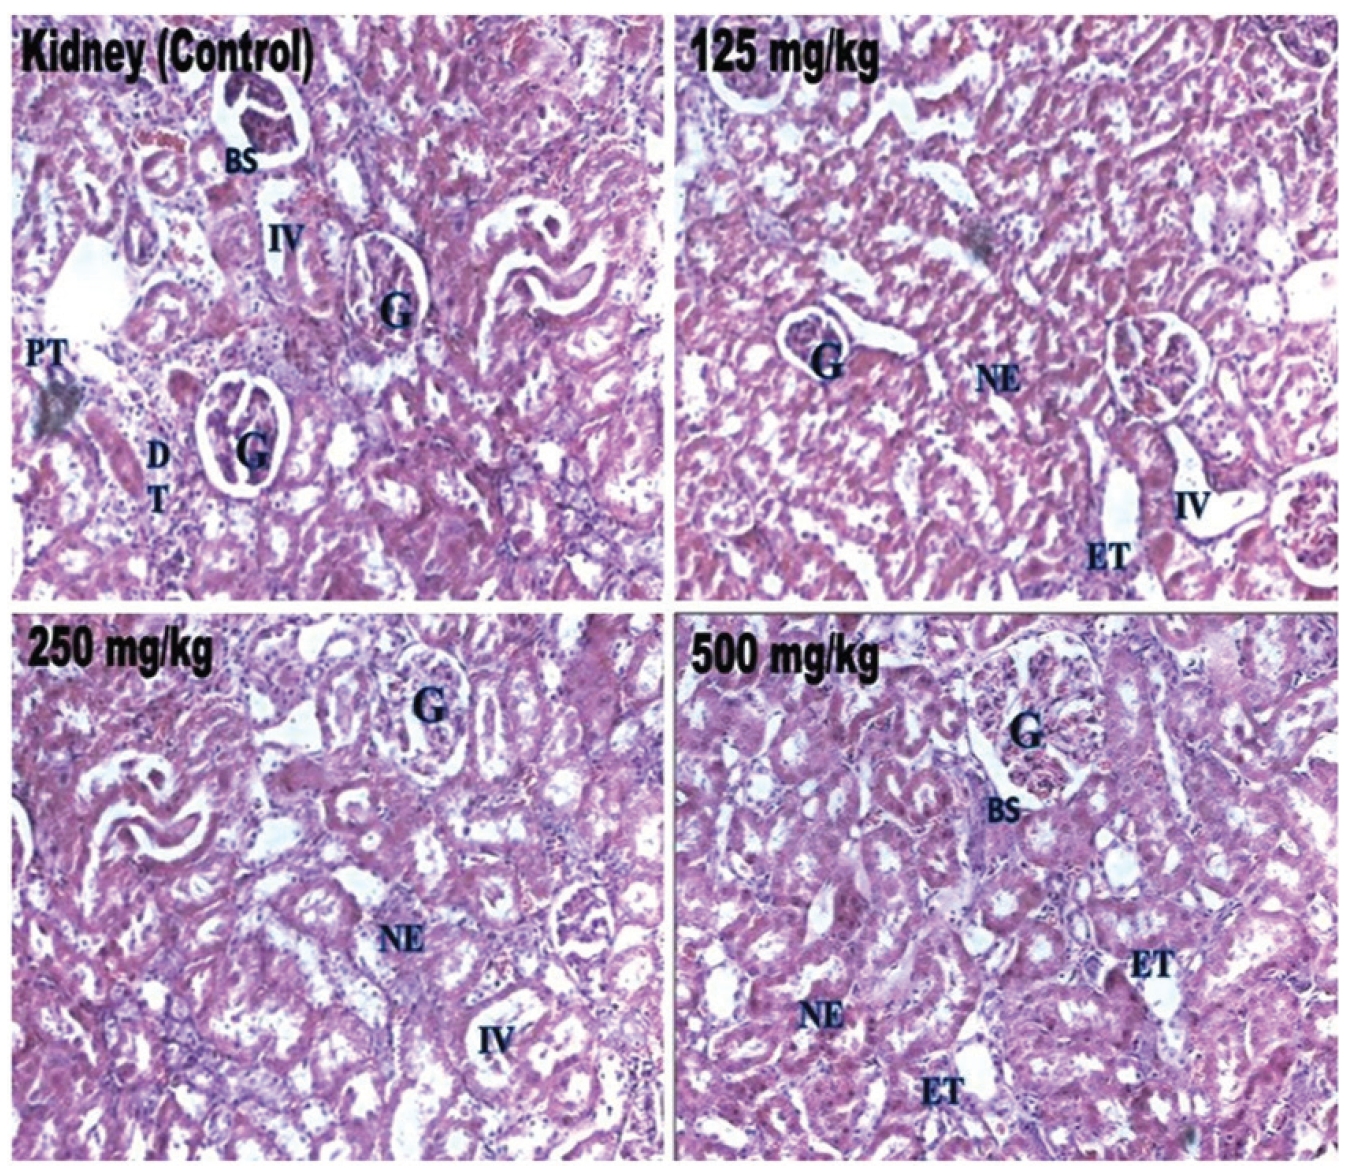 Histopathological examinations of rat kidney sections from
the control rats and from the test rats treated with extract of W. volubilis.
G, glomerulus; BS, Bowman space; PT, proximal tubule; DT, distal
tubule; IV, interstitial vessel; ET, epithelium of tubules; NE, normal
epithelium.